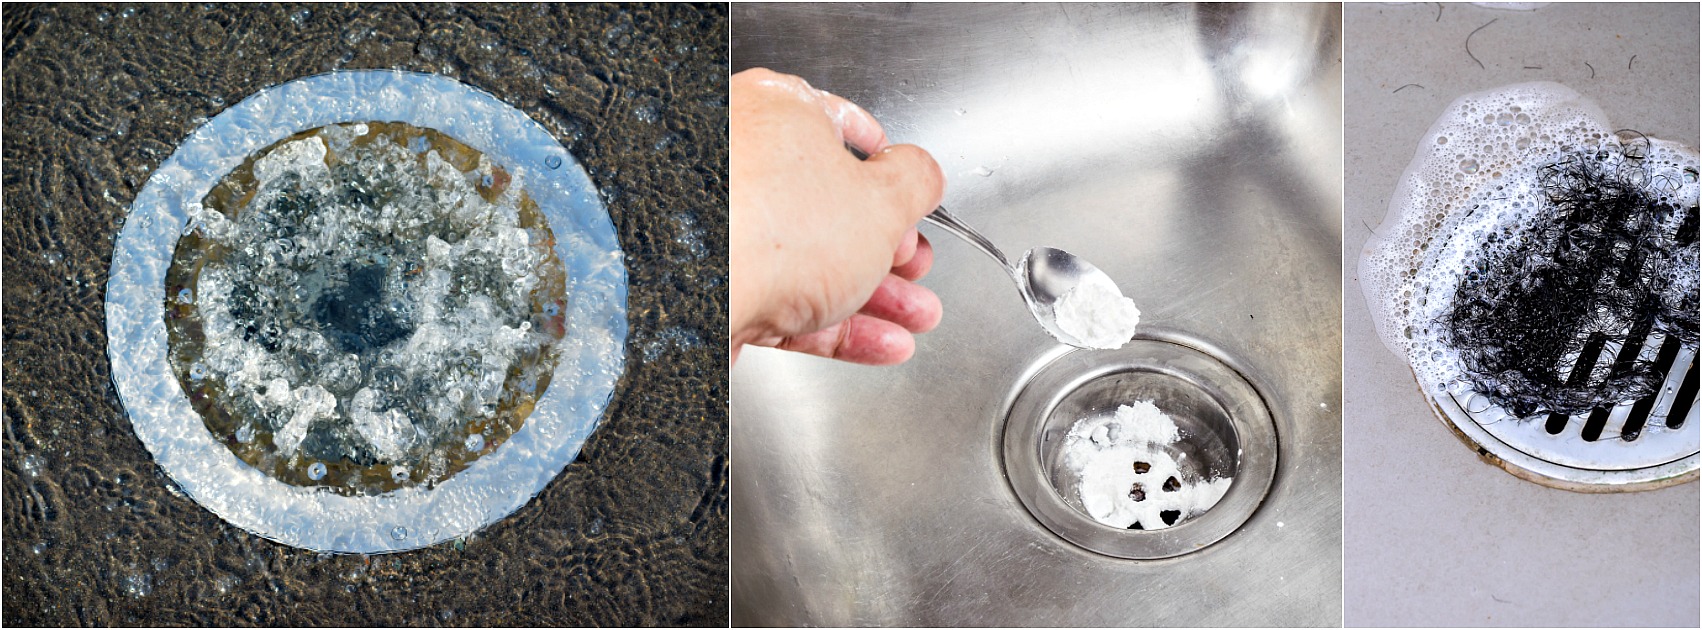 Two EASY hacks to clear backed up drains